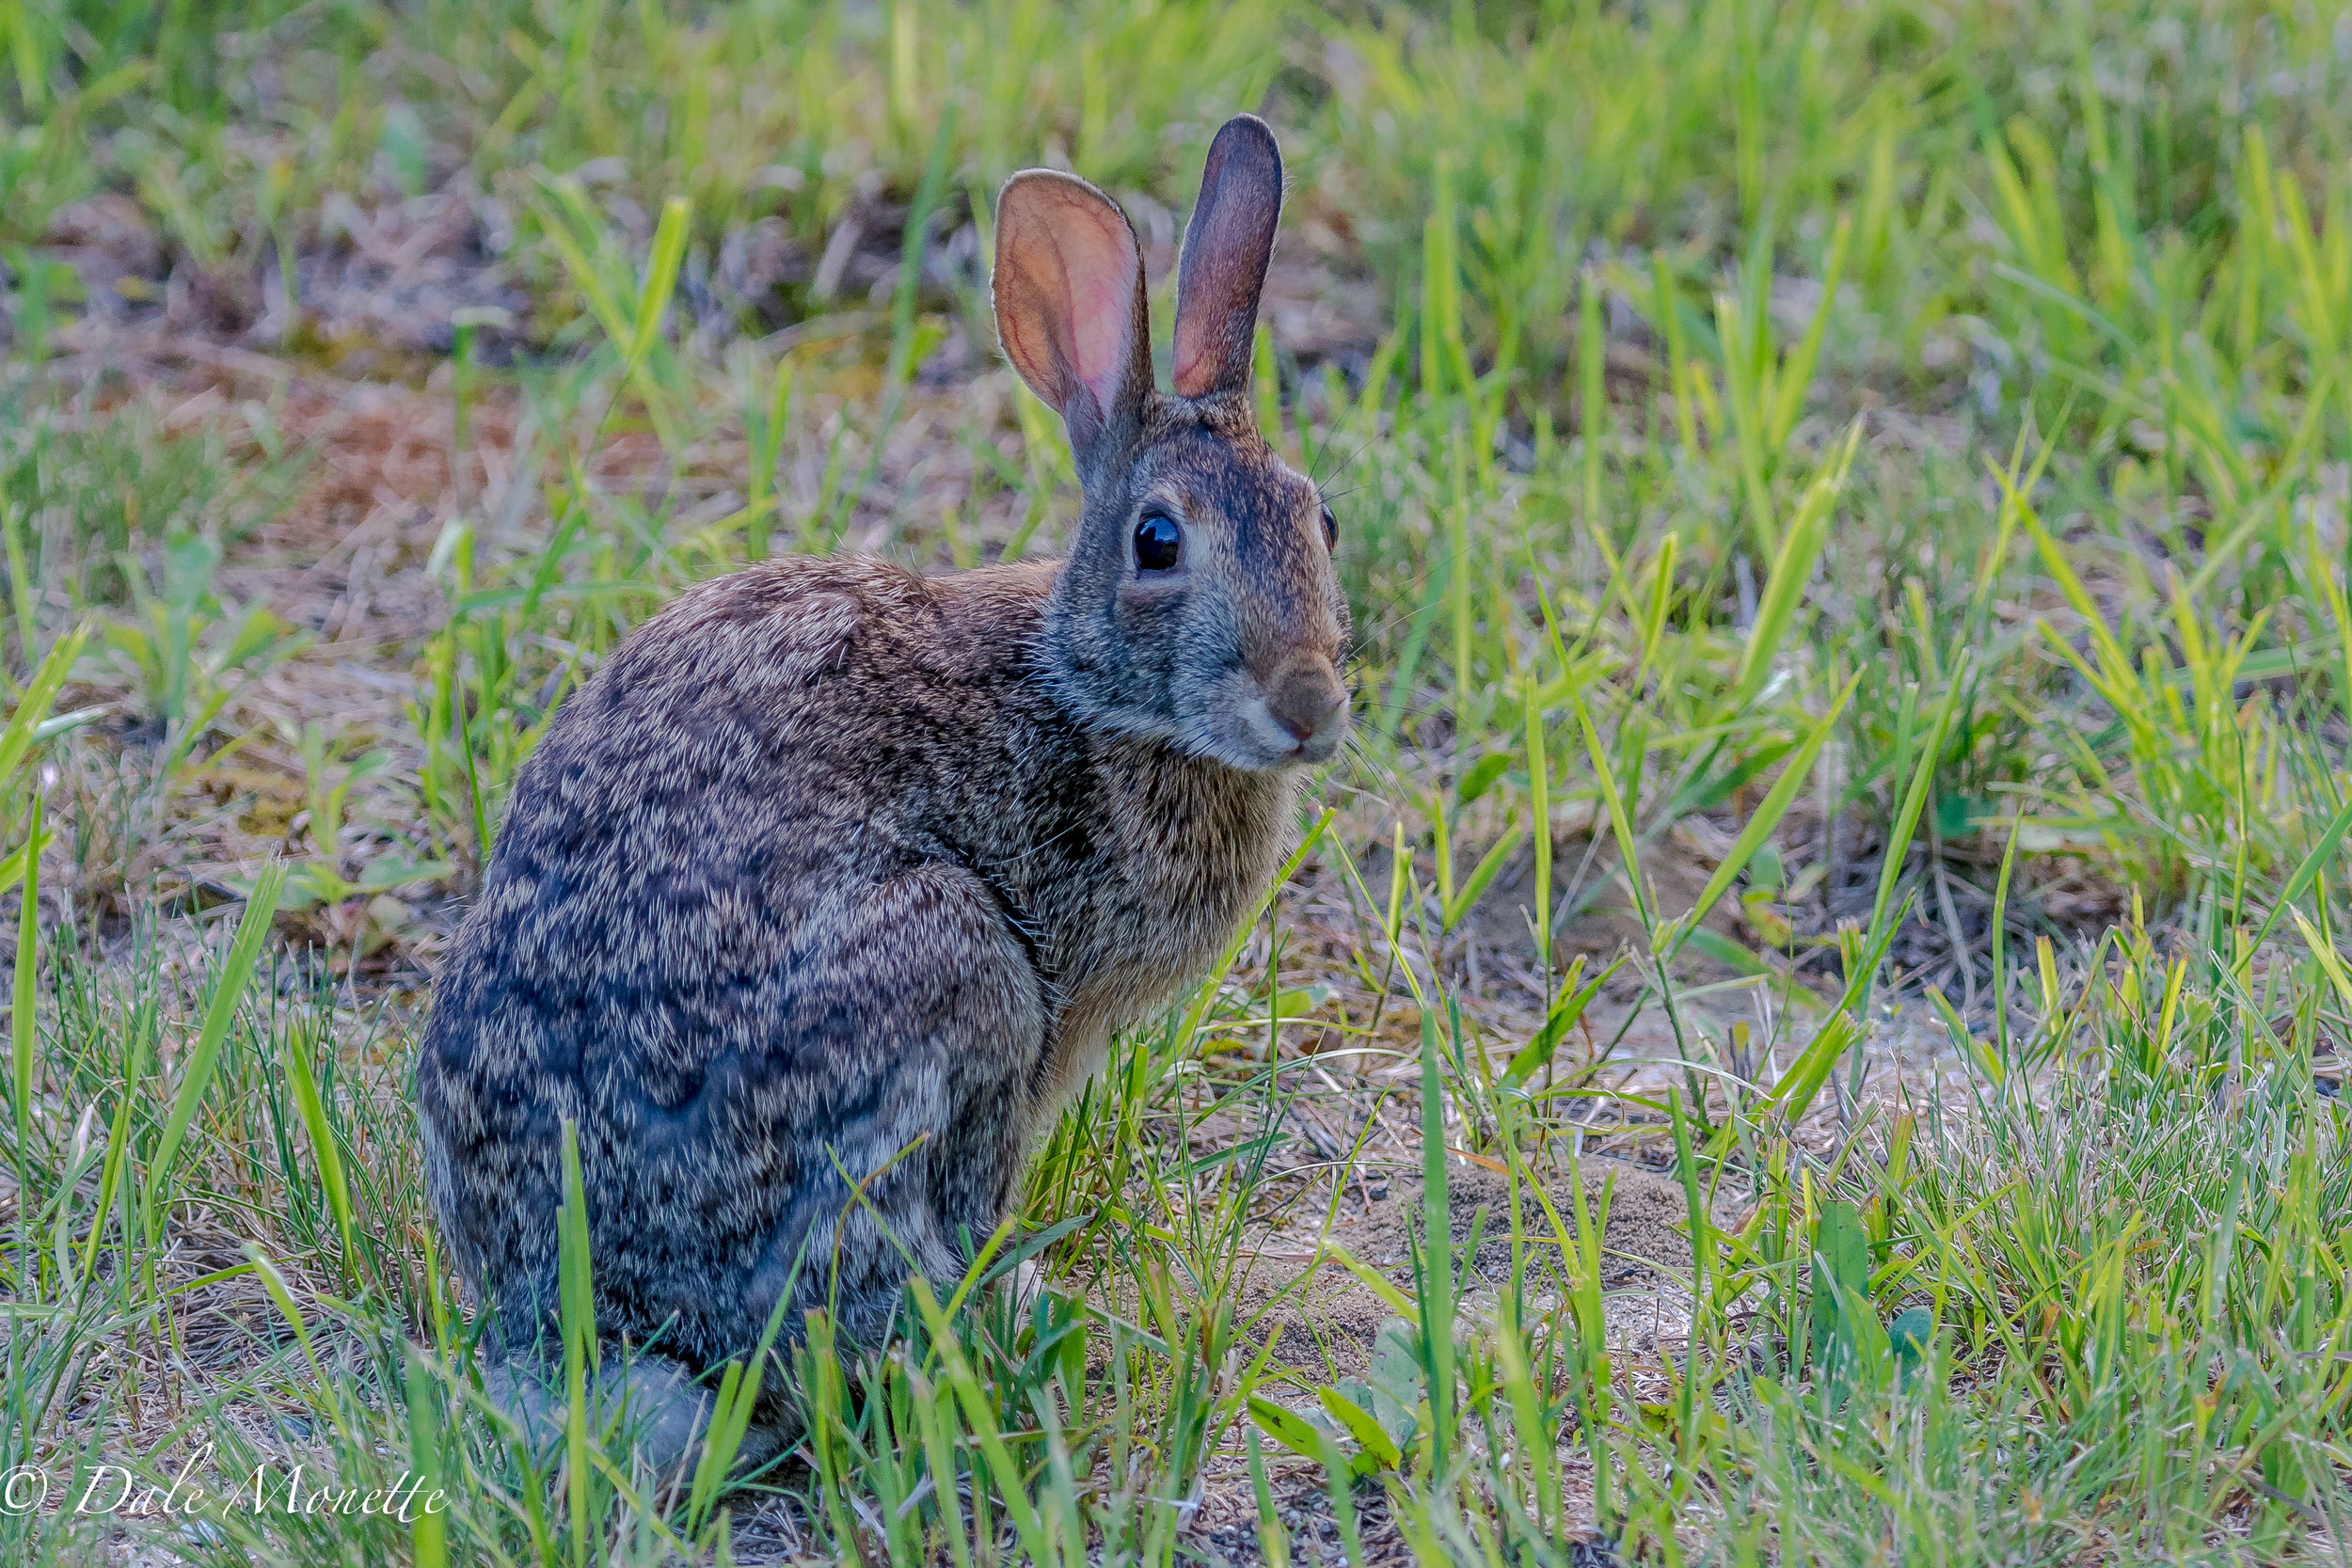   An eastern cotton-tail rabbit &nbsp;was eating its supper when I blundered into it. &nbsp;It sniffed at me a few times and I took this picture and left. &nbsp;It then went back to munching grass. &nbsp;6/25/17  